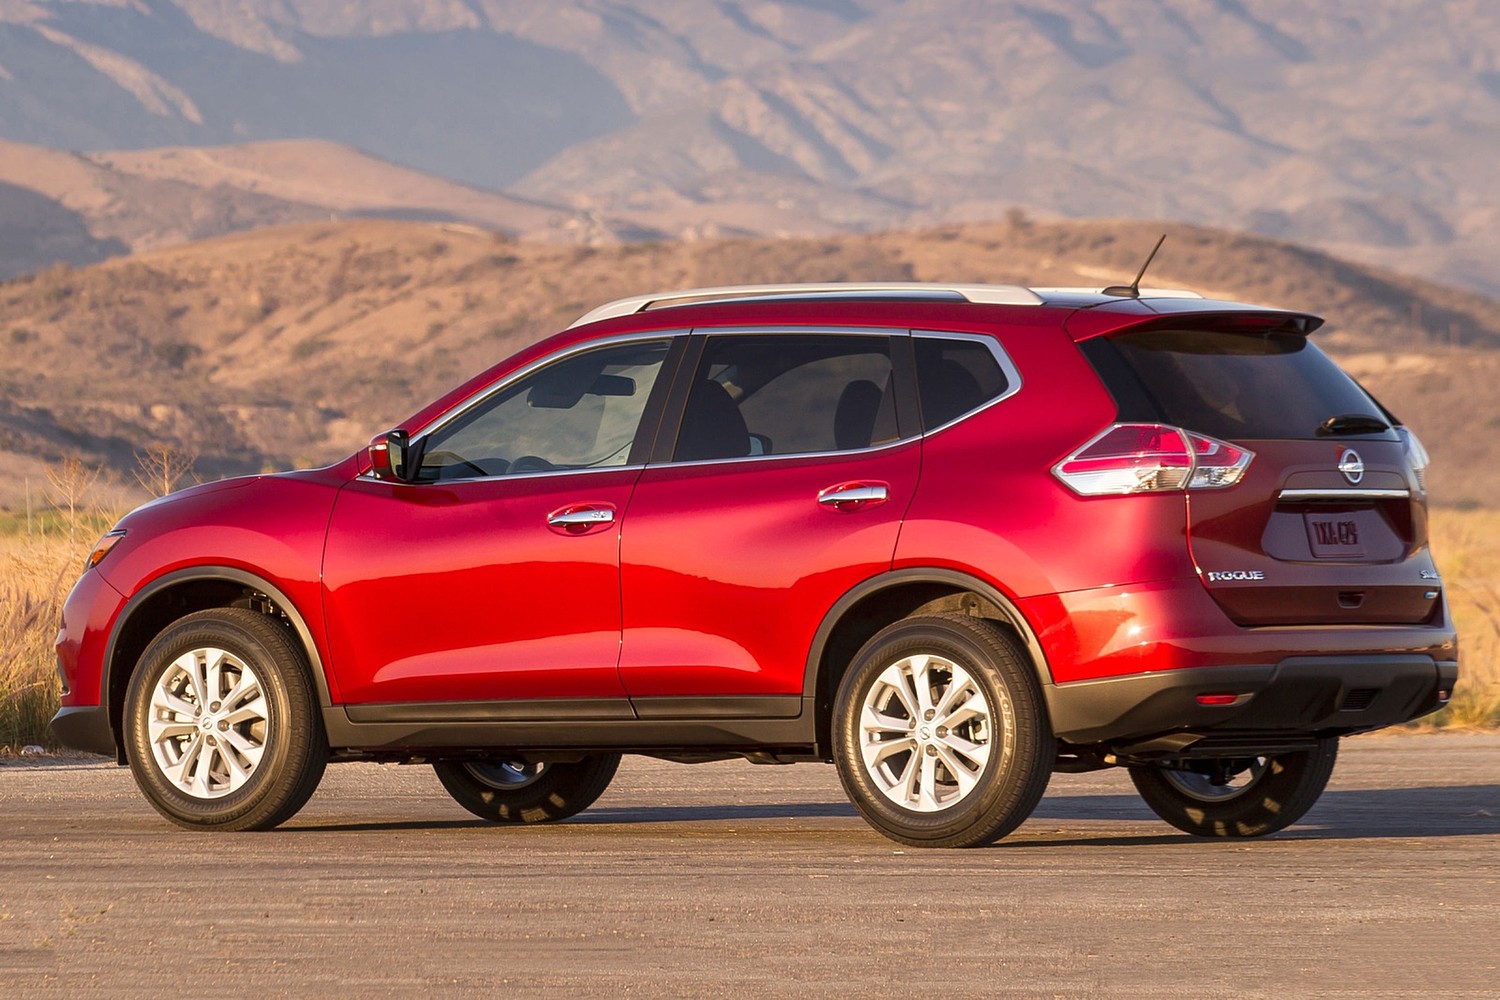 2016 Nissan Rogue SV 4dr SUV Exterior Shown